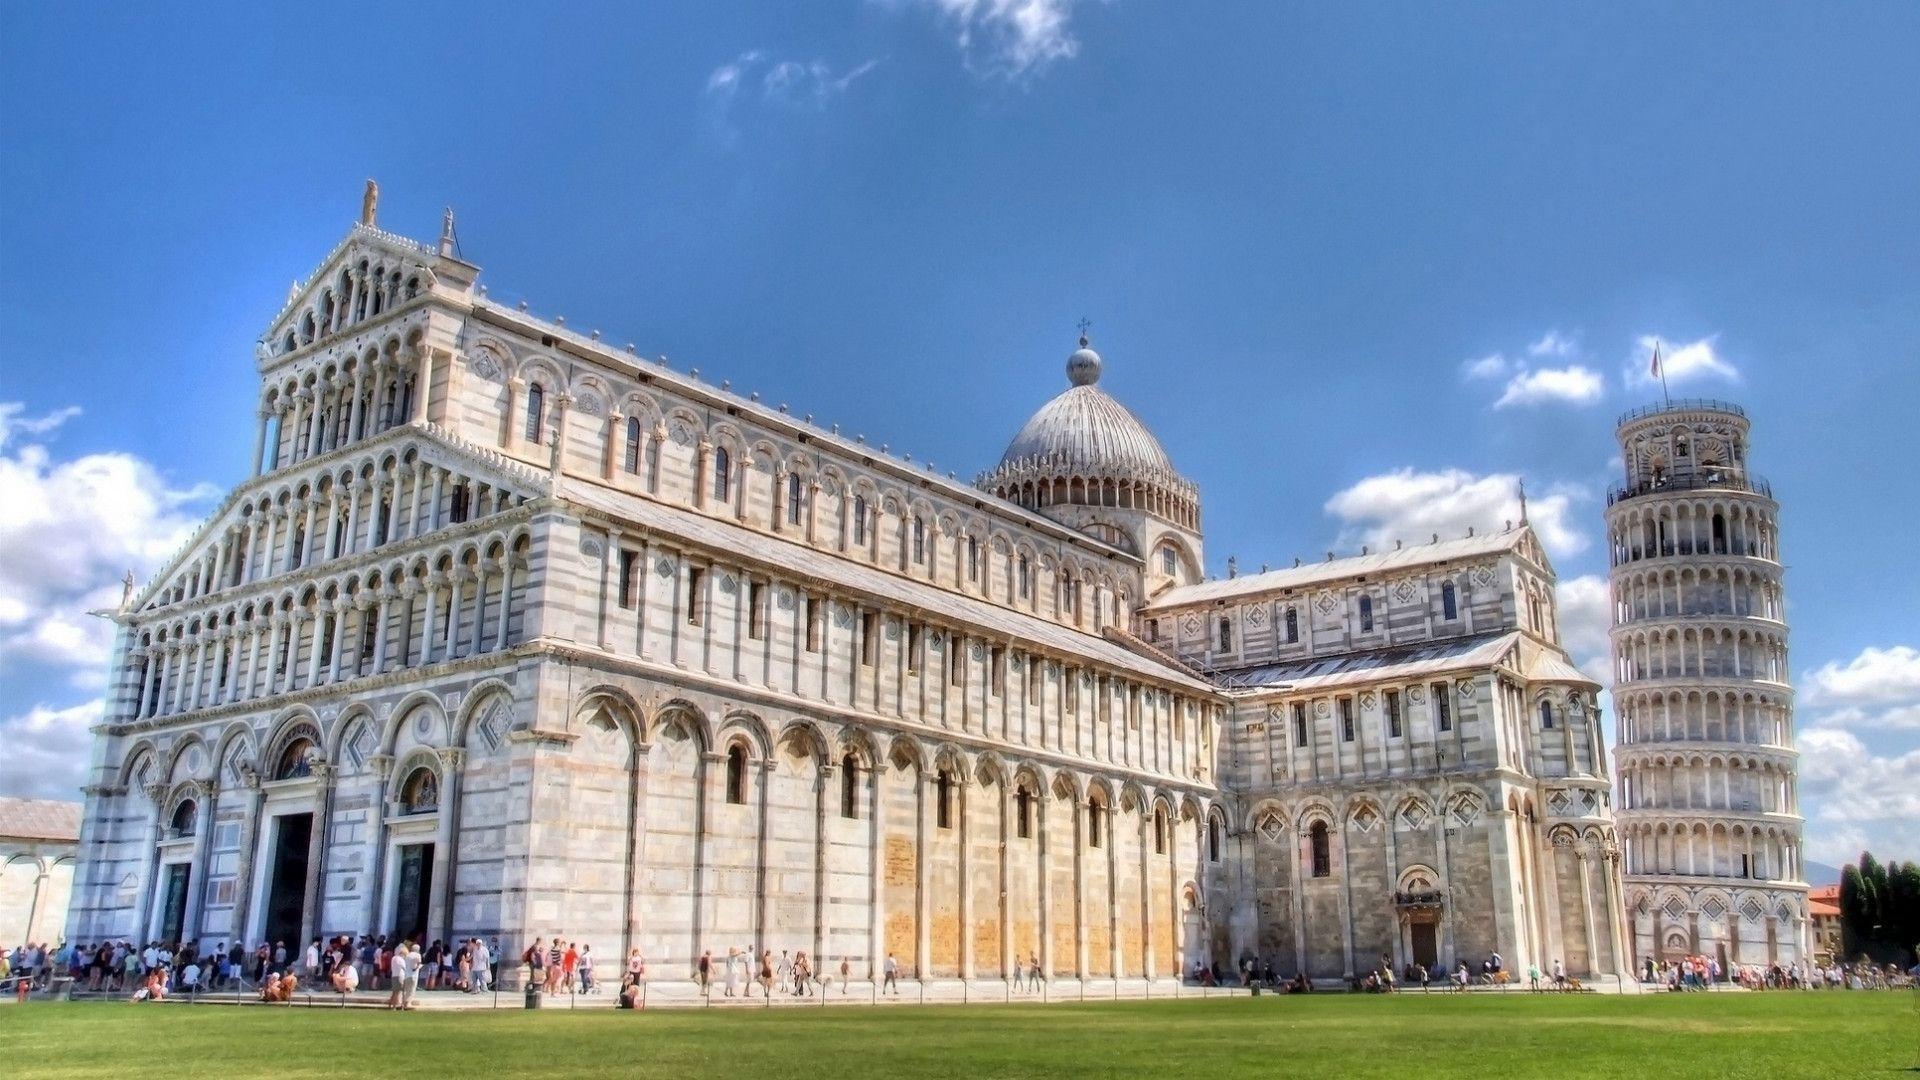 HD Cathedral Leaning Tower Of Pisa Hdr Wallpaper. Download Free